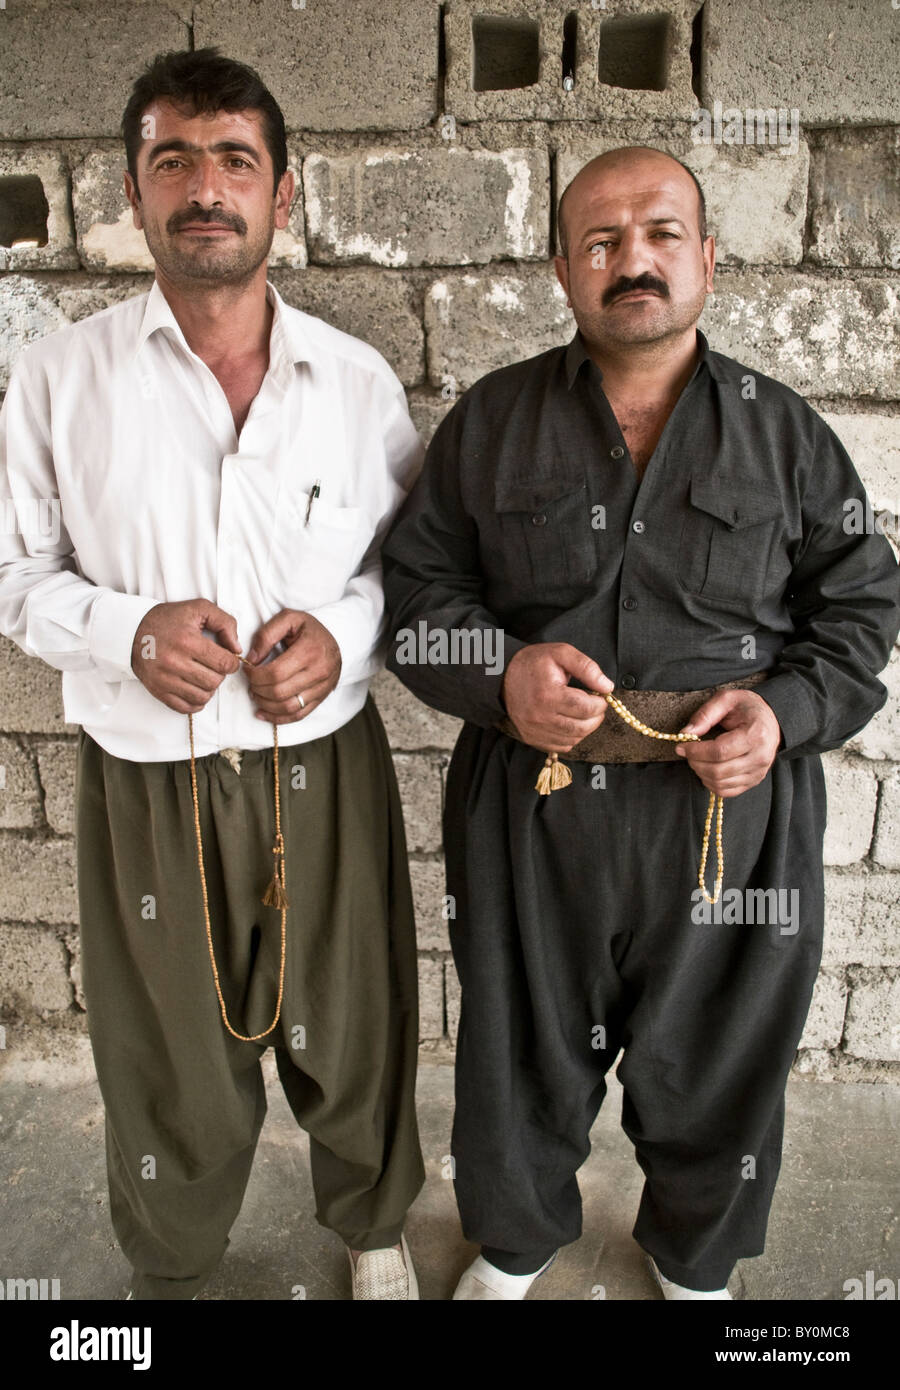 A portrait of two Kurdish men wearing traditional baggy pants and holding worry beads in the city Shaqlawa in Kurdistan region of Northern Iraq. Stock Photo